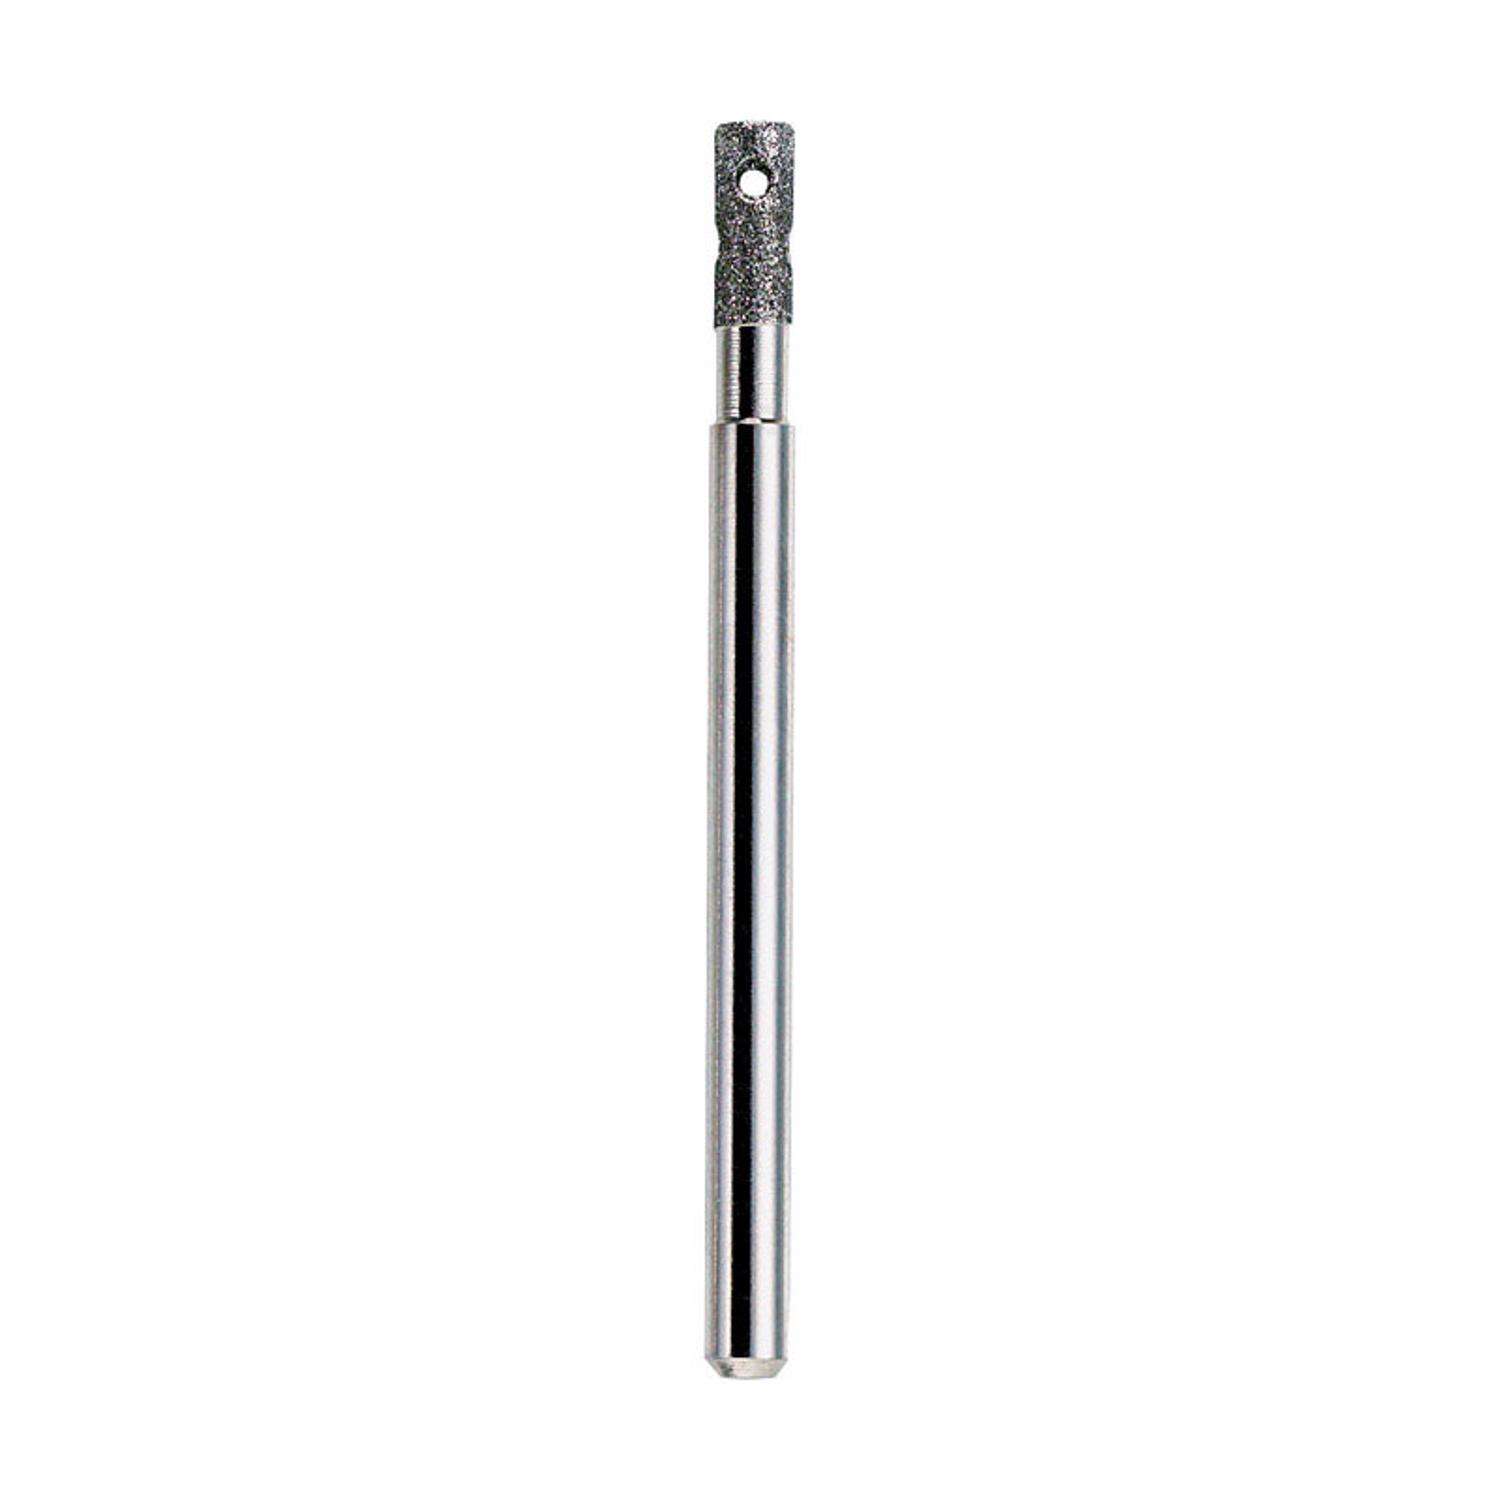 Diamond Tip Circle and Straight Glass Cutter, Adjustable Scaled